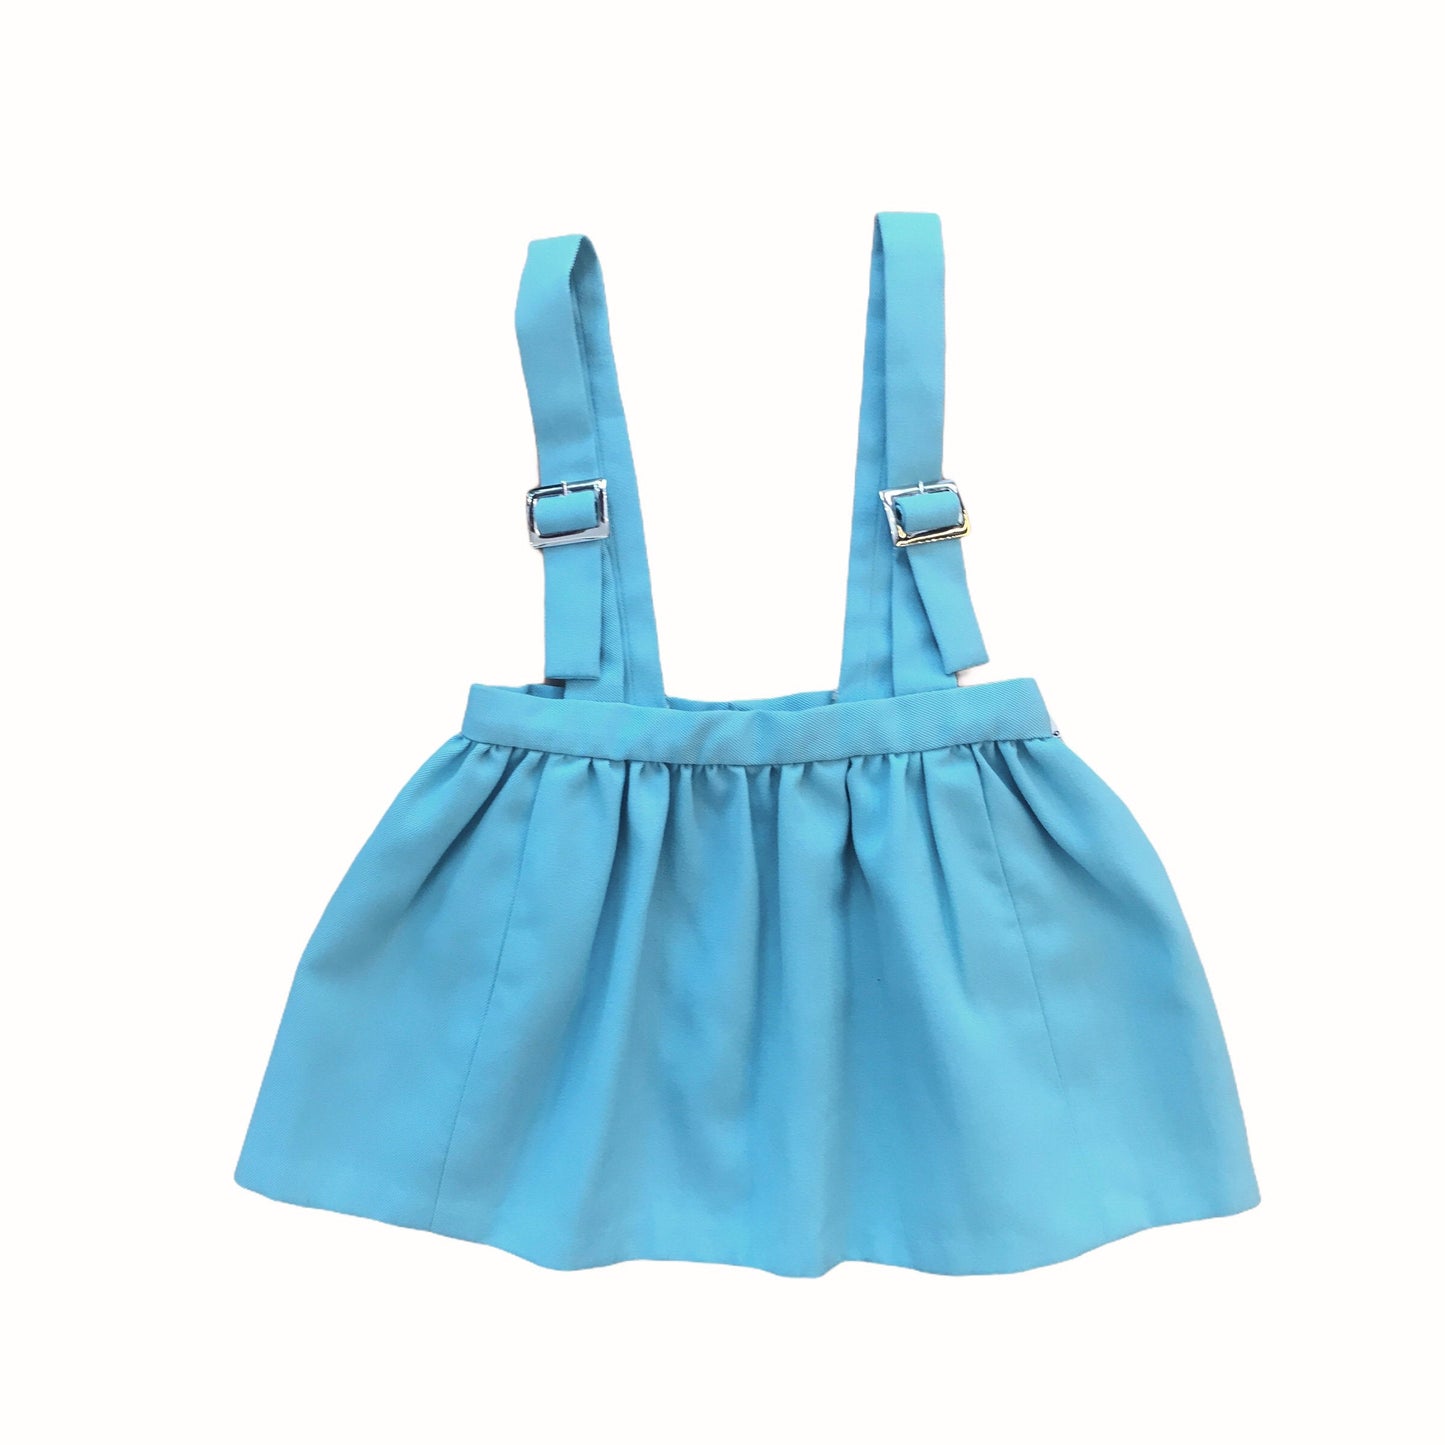 Load image into Gallery viewer, Vintage 1960s Turquoise Toddler Suspenders Skirt French Made 18-24 Months
